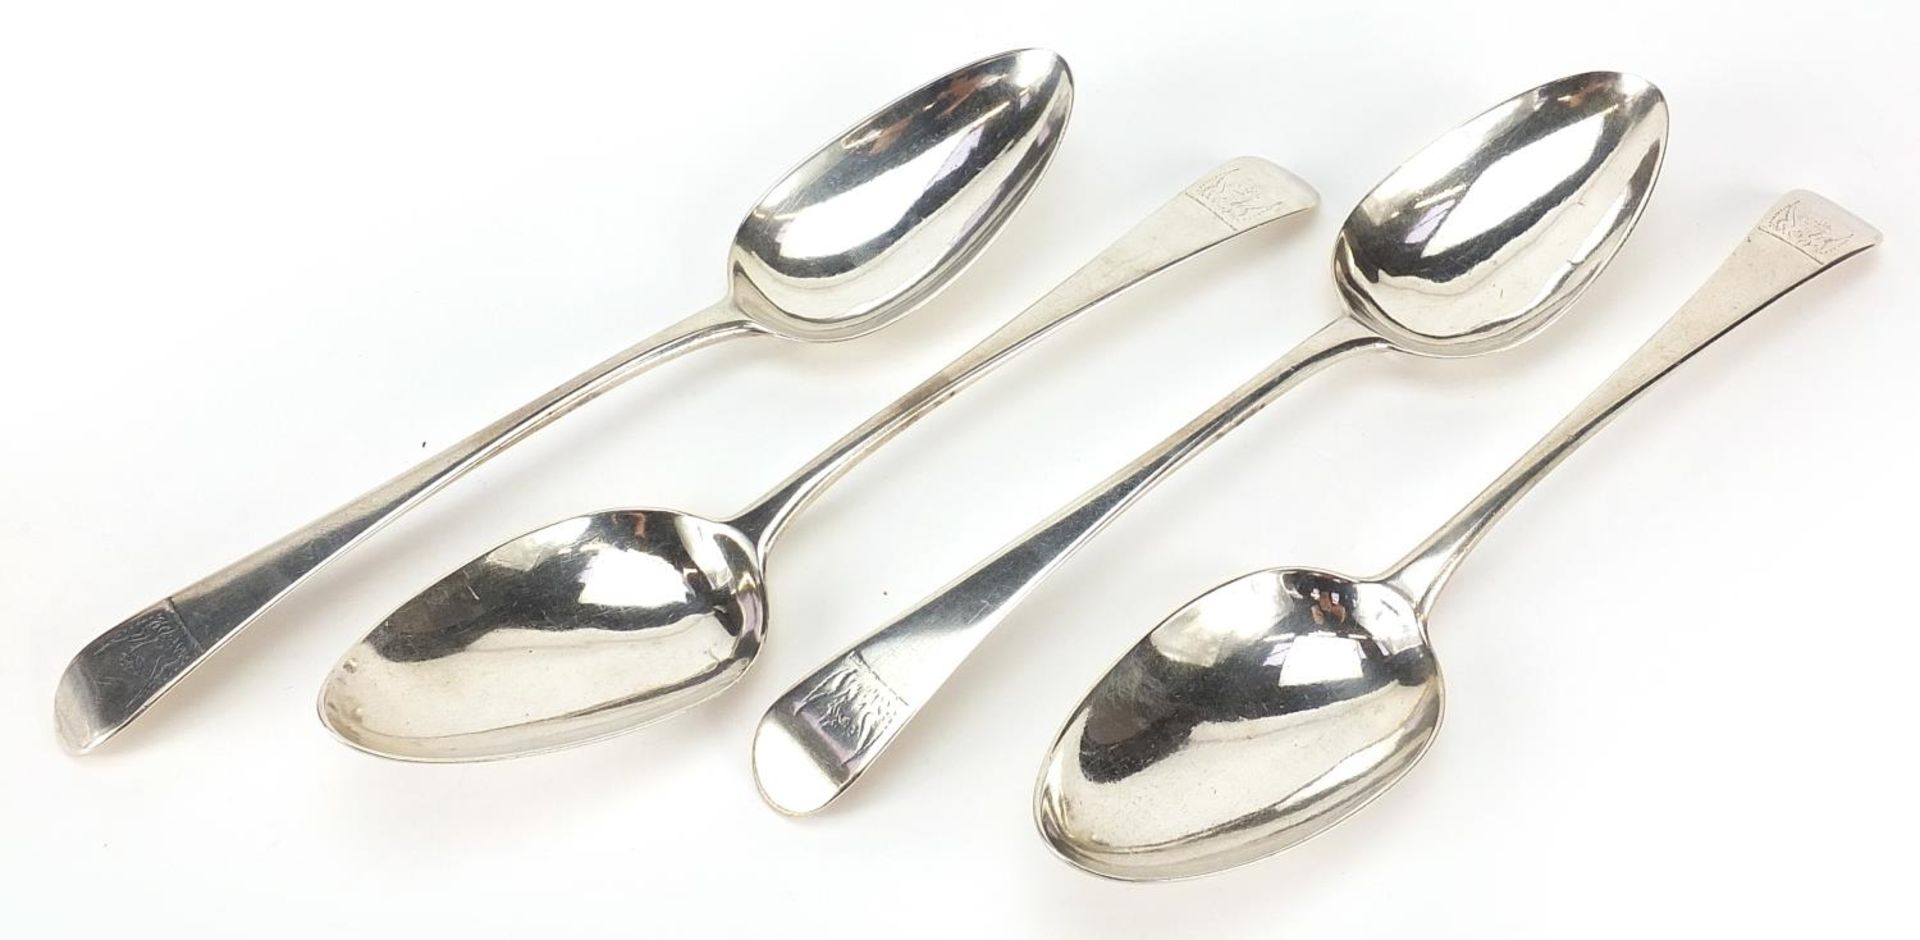 George Smith & William Fearn, set of four George III silver tablespoons, 22.5cm in length, 250.0g